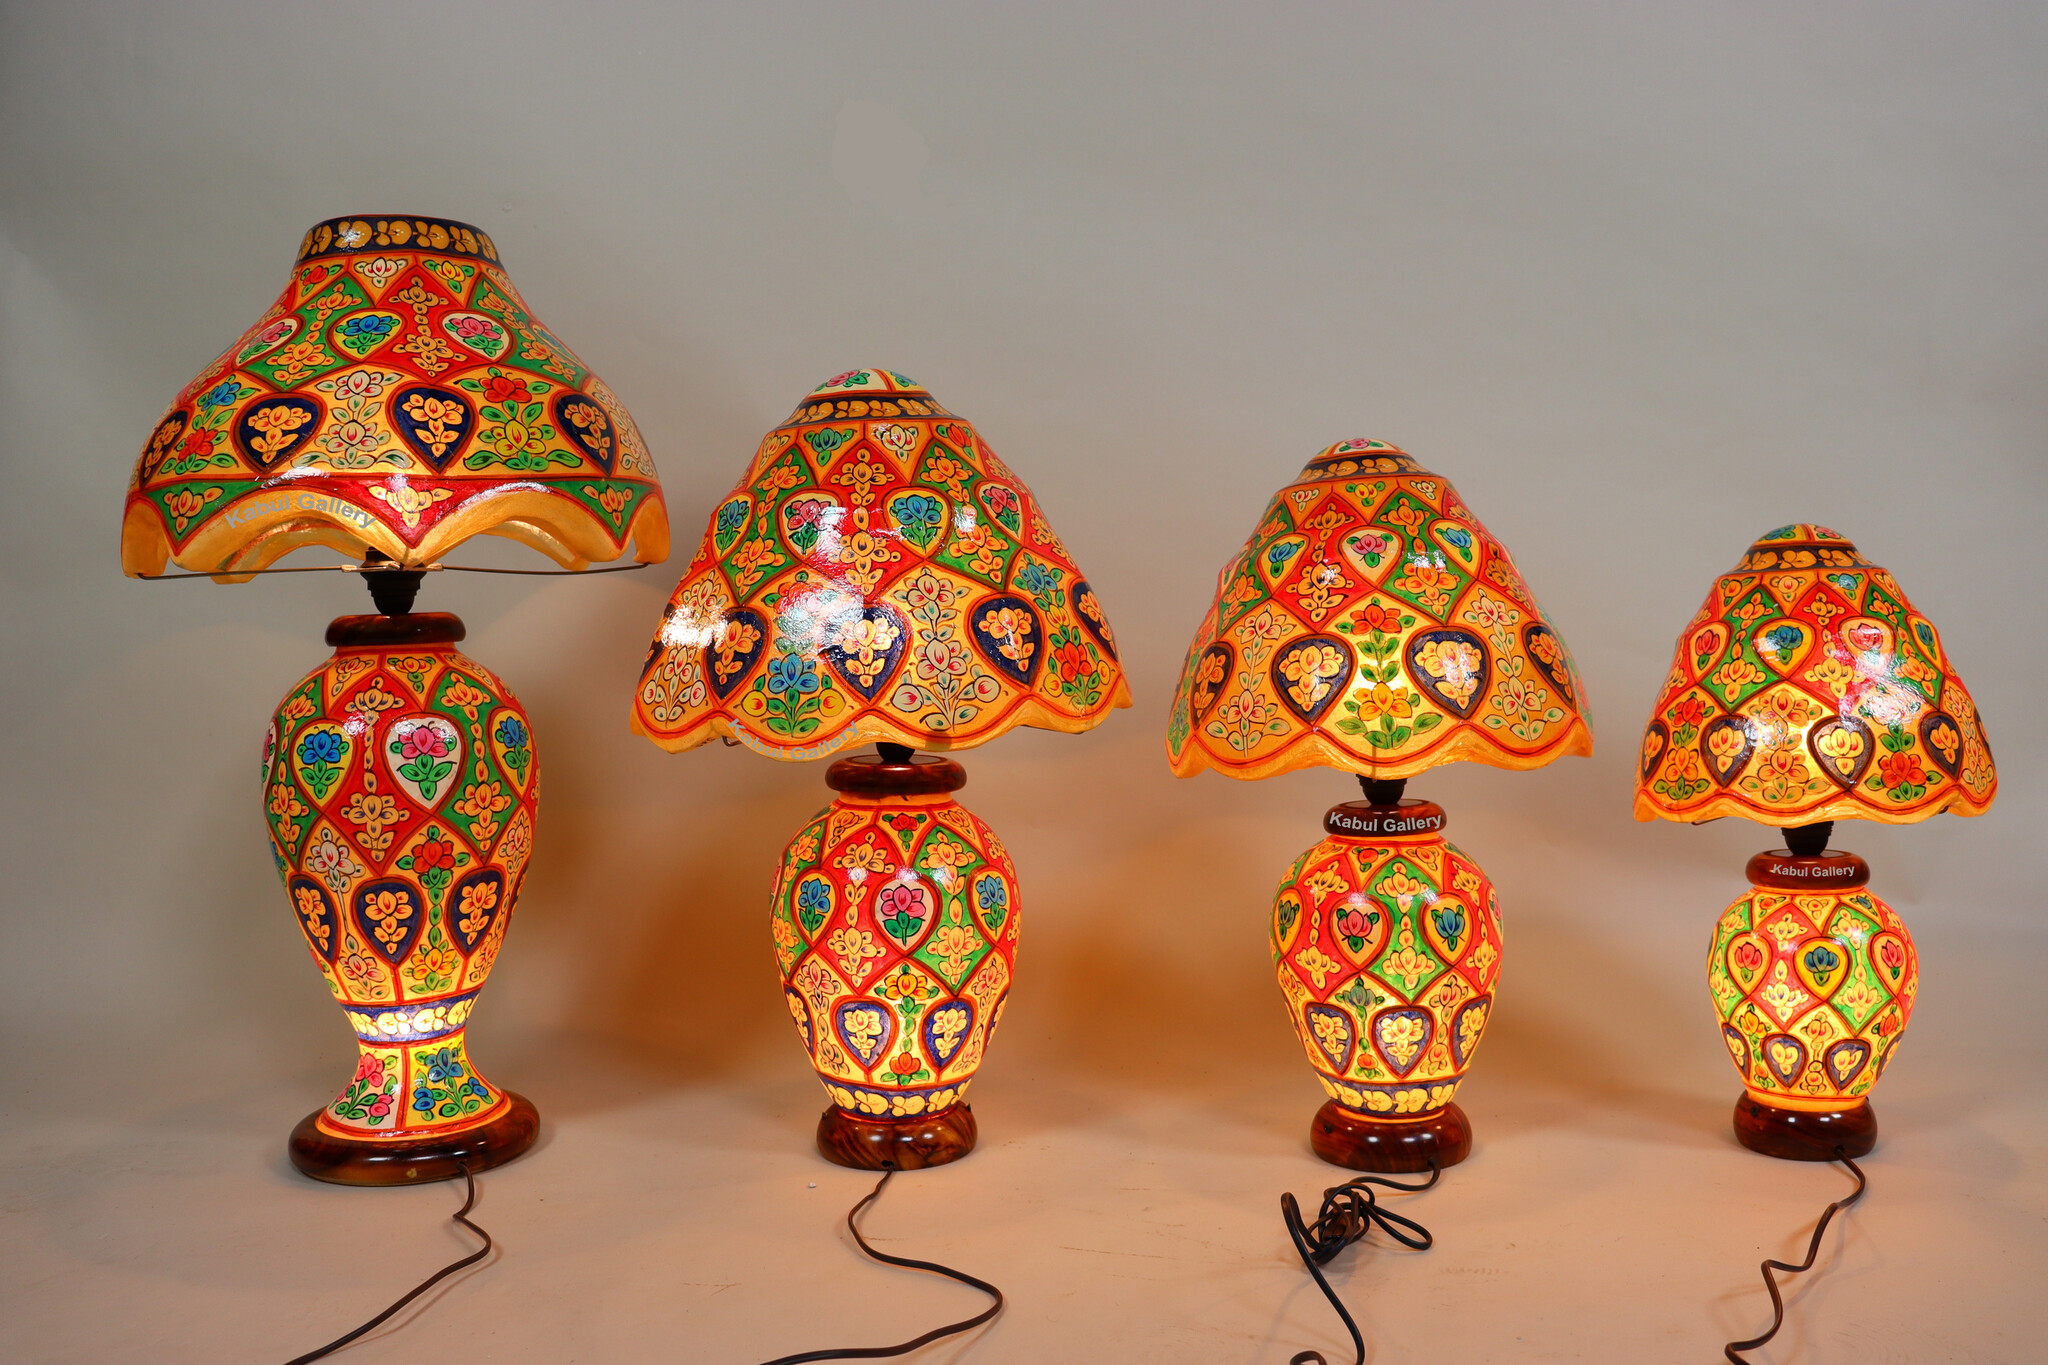 oriental hand made and  Hand Painted Camel Skin leather Lamp table lamp night lamp from Multan Pakistan 23/5